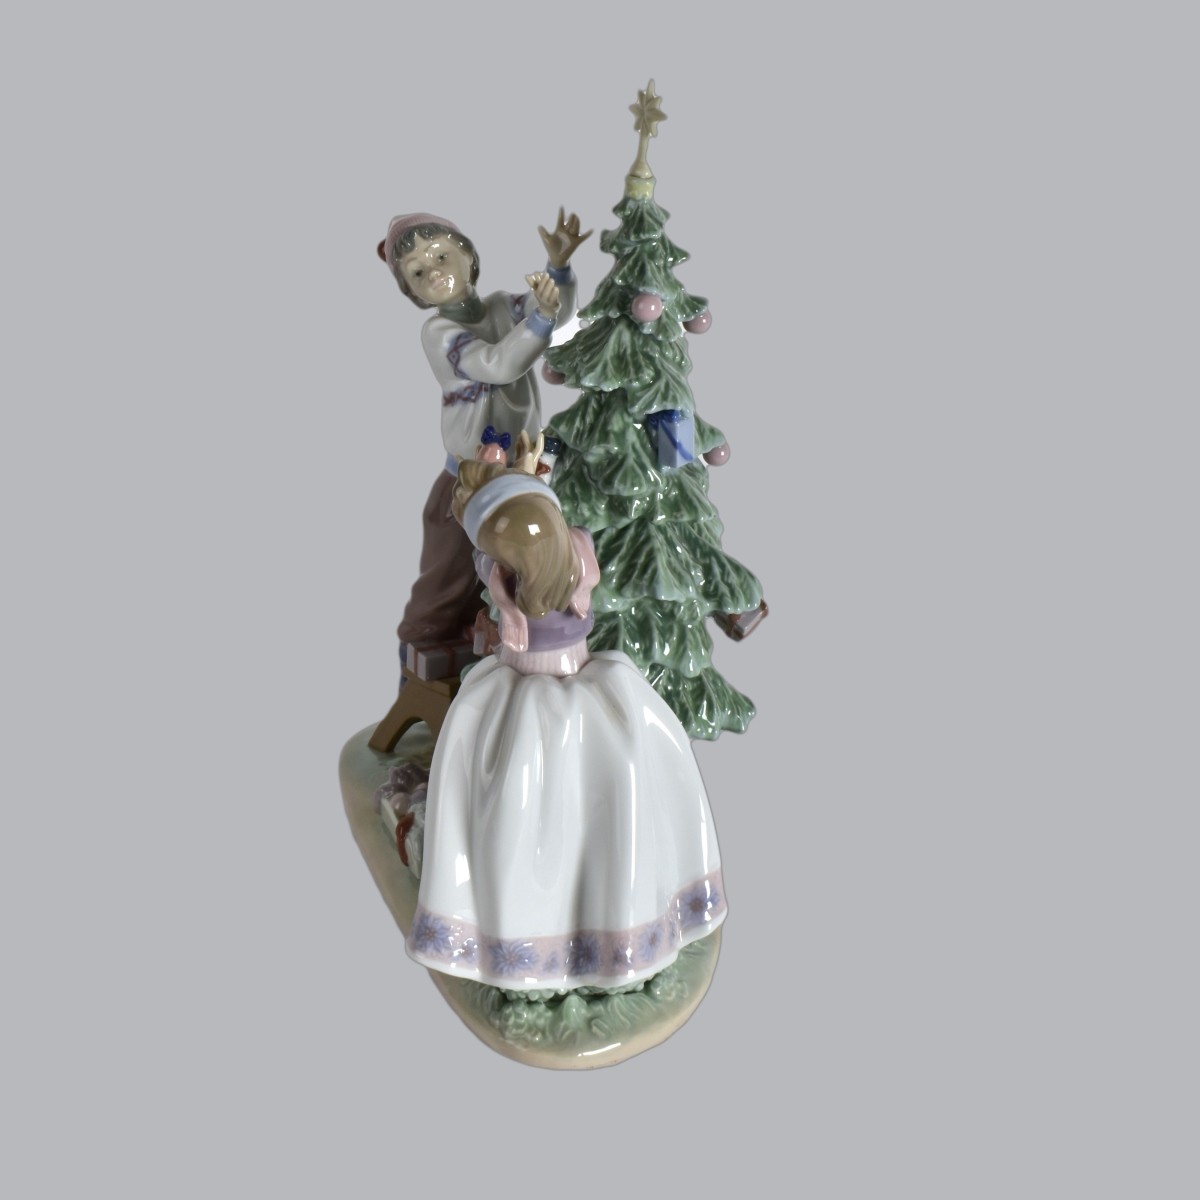 Lladro "Trimming The Tree" Group